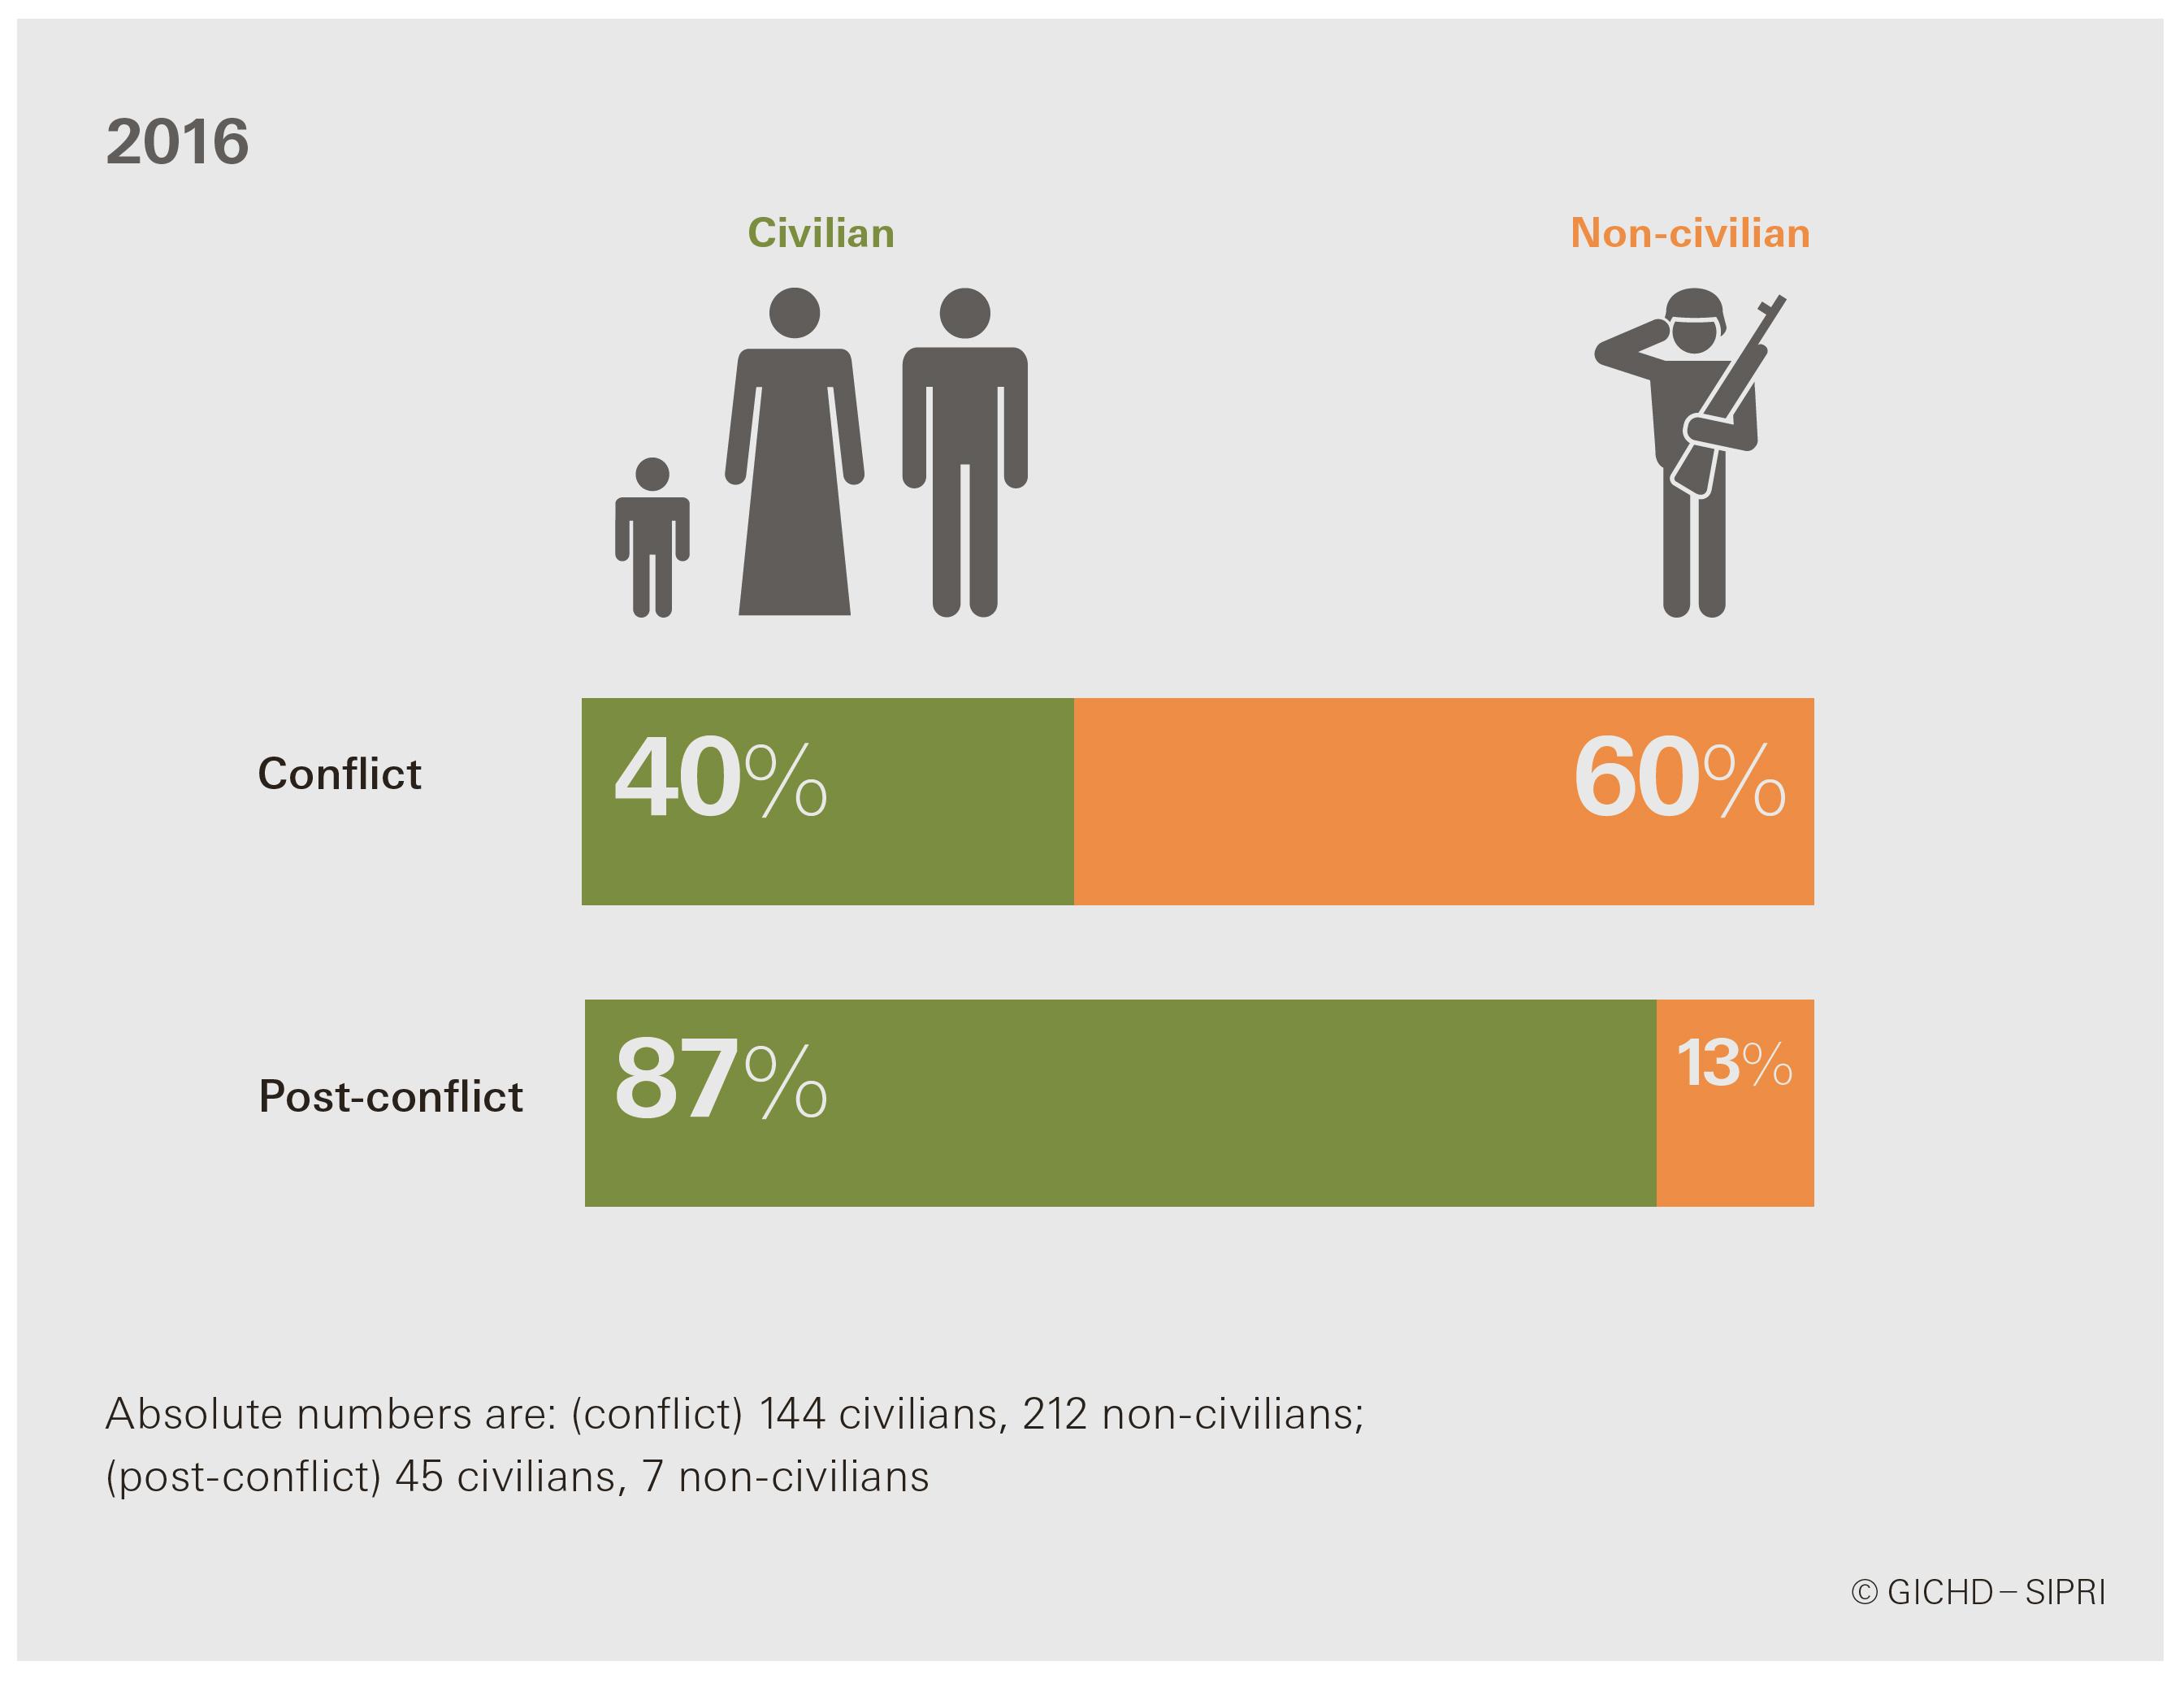 Figure 2: Casualty demographics in conflict vs post-conflict settings in 2016. Infographic: GICHD–SIPRI.